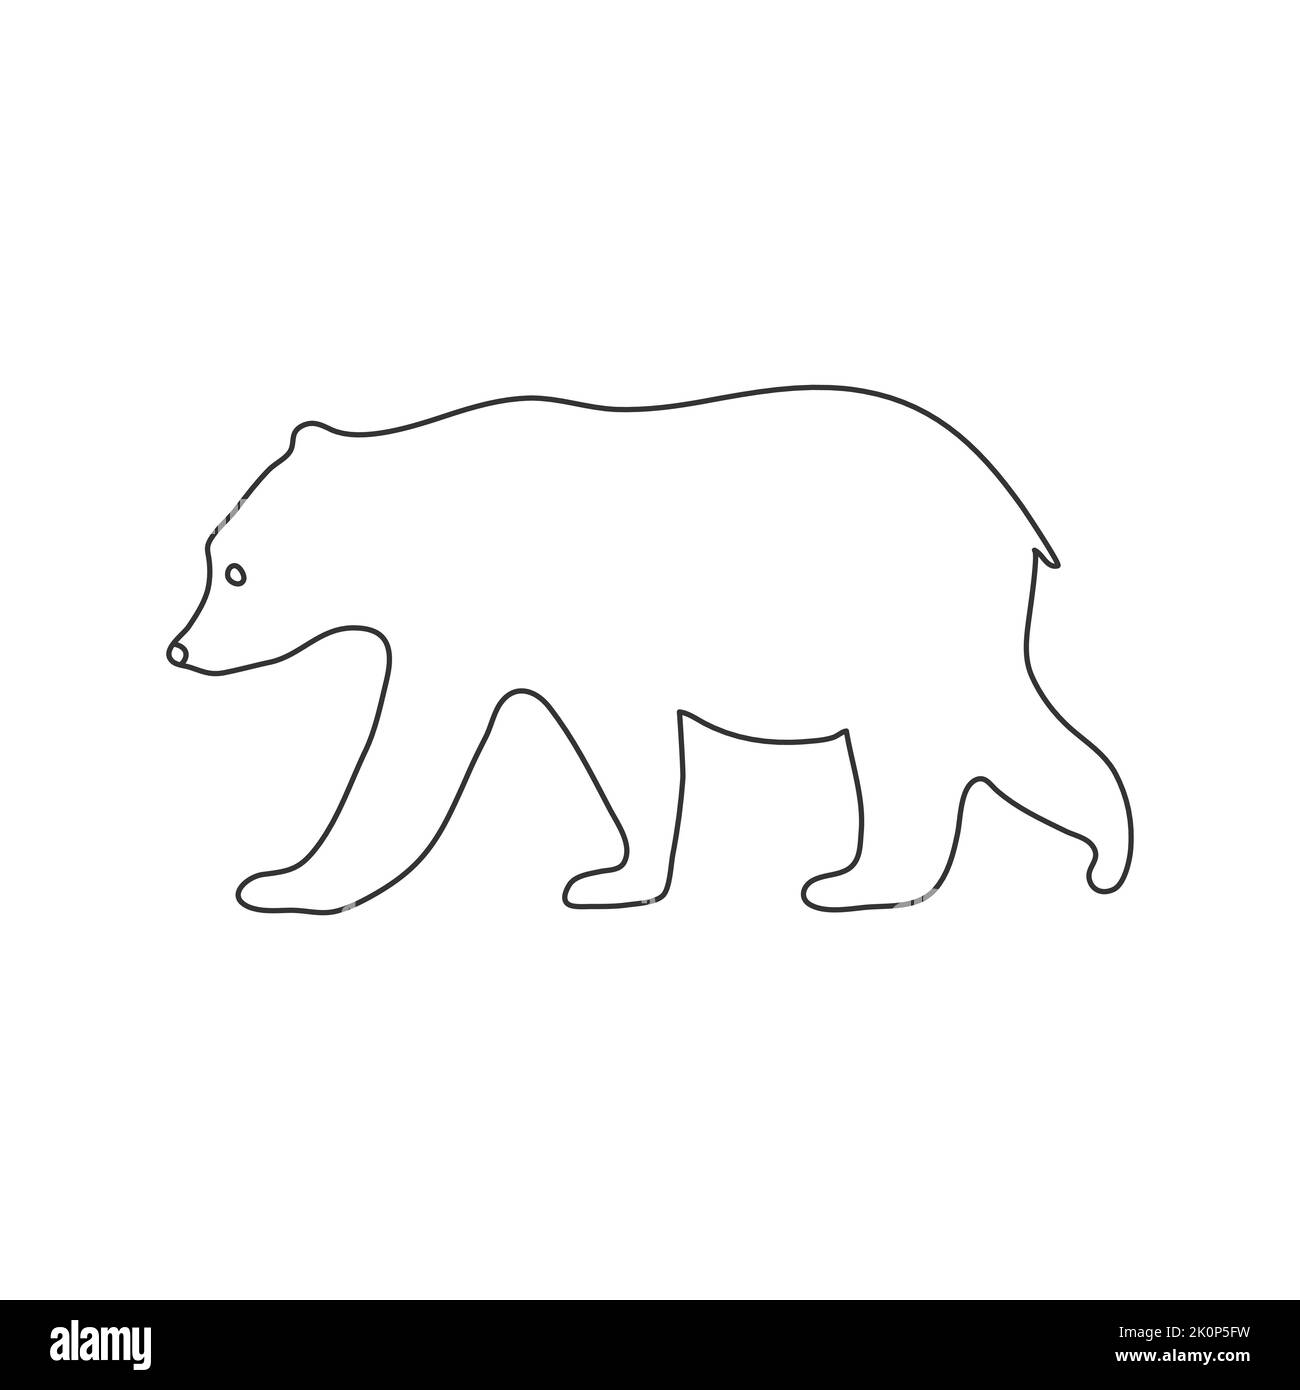 Bear animal hand-drawn line vector isolated on white background. Stock Vector